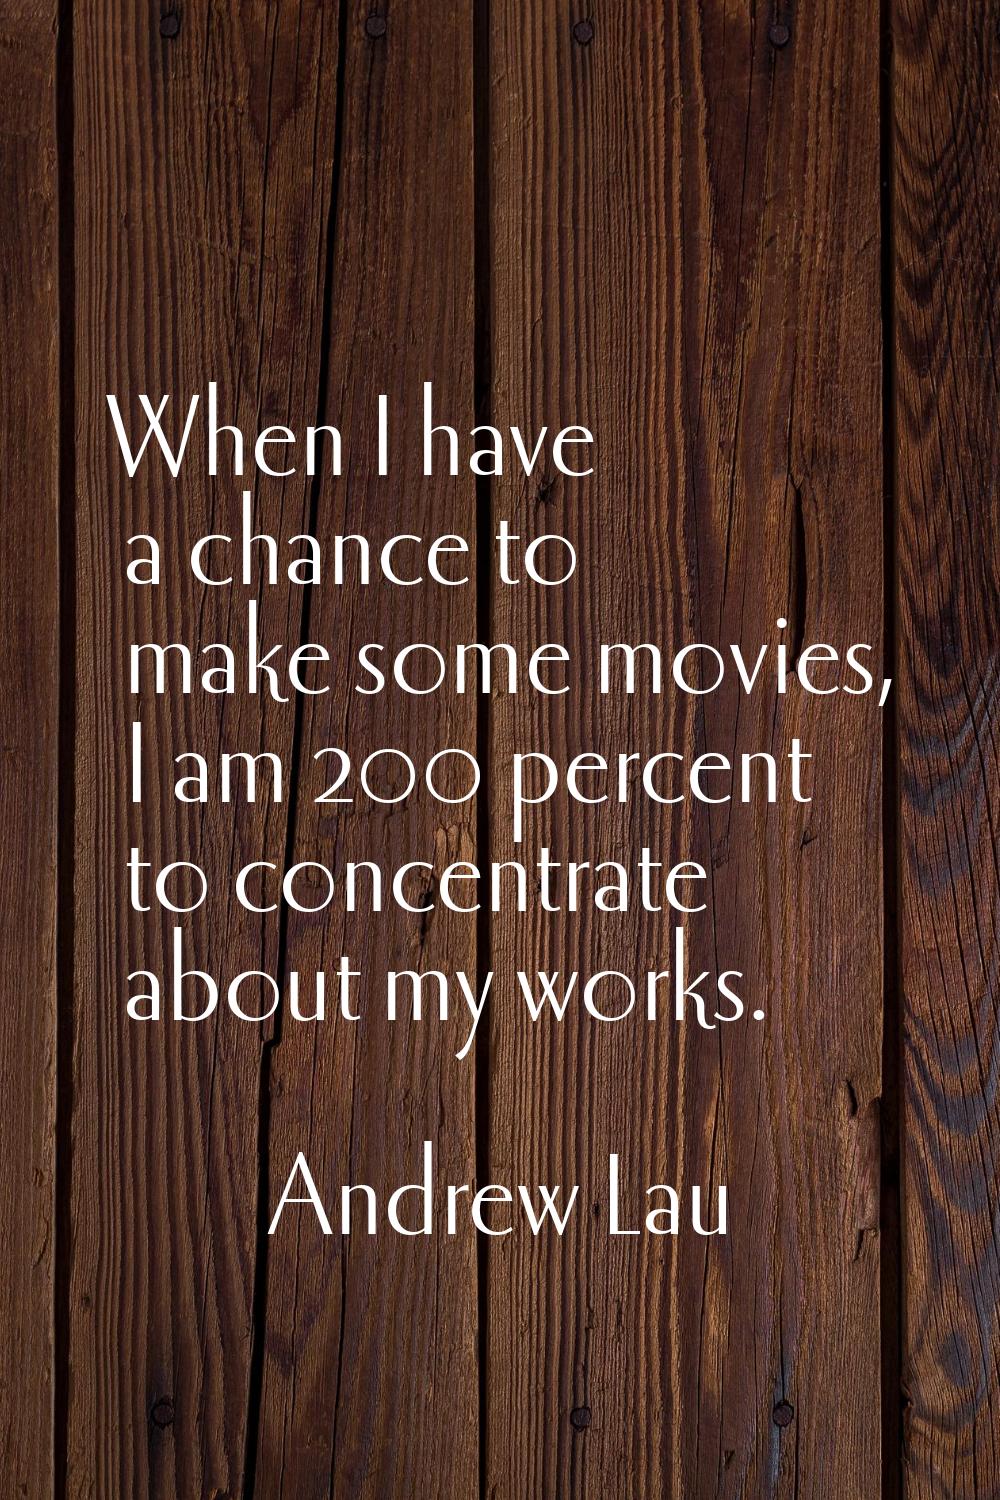 When I have a chance to make some movies, I am 200 percent to concentrate about my works.